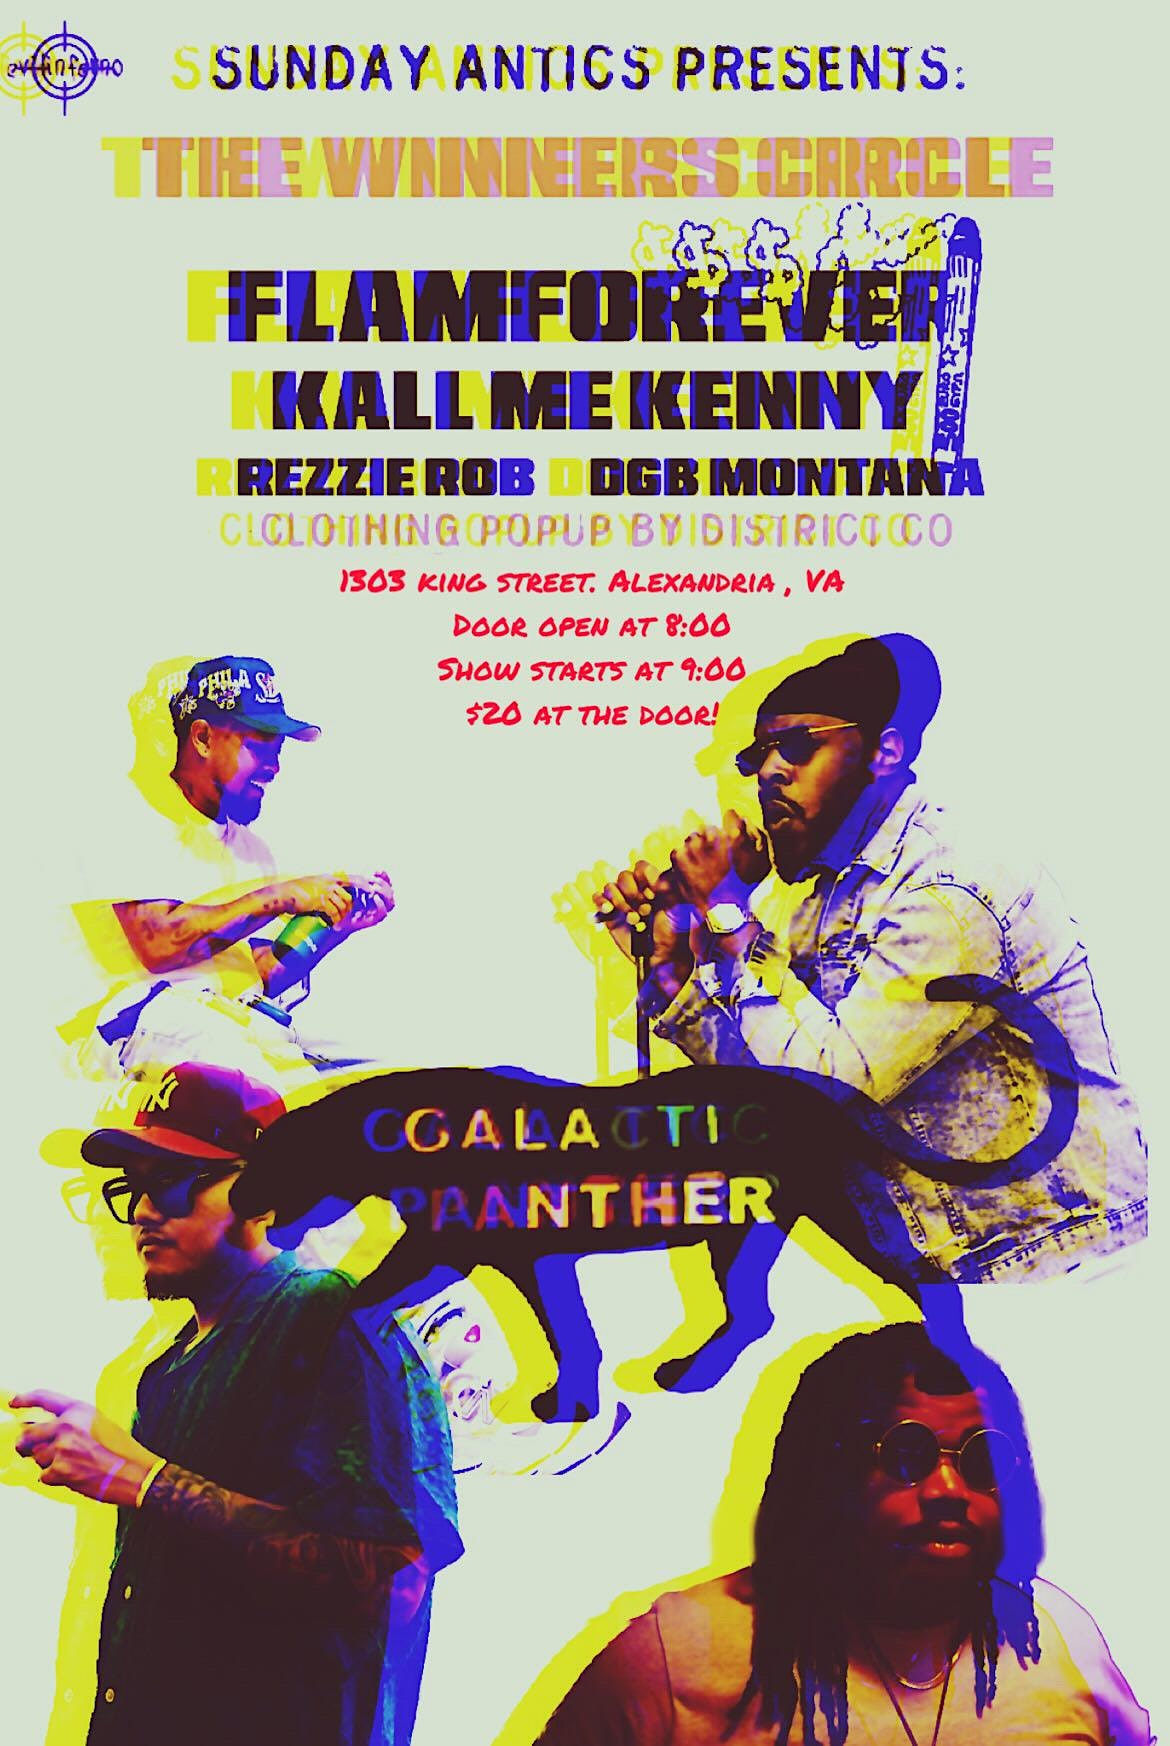 Saturday Night Live HipHop Music by FlamForever & Kall Me Kenny